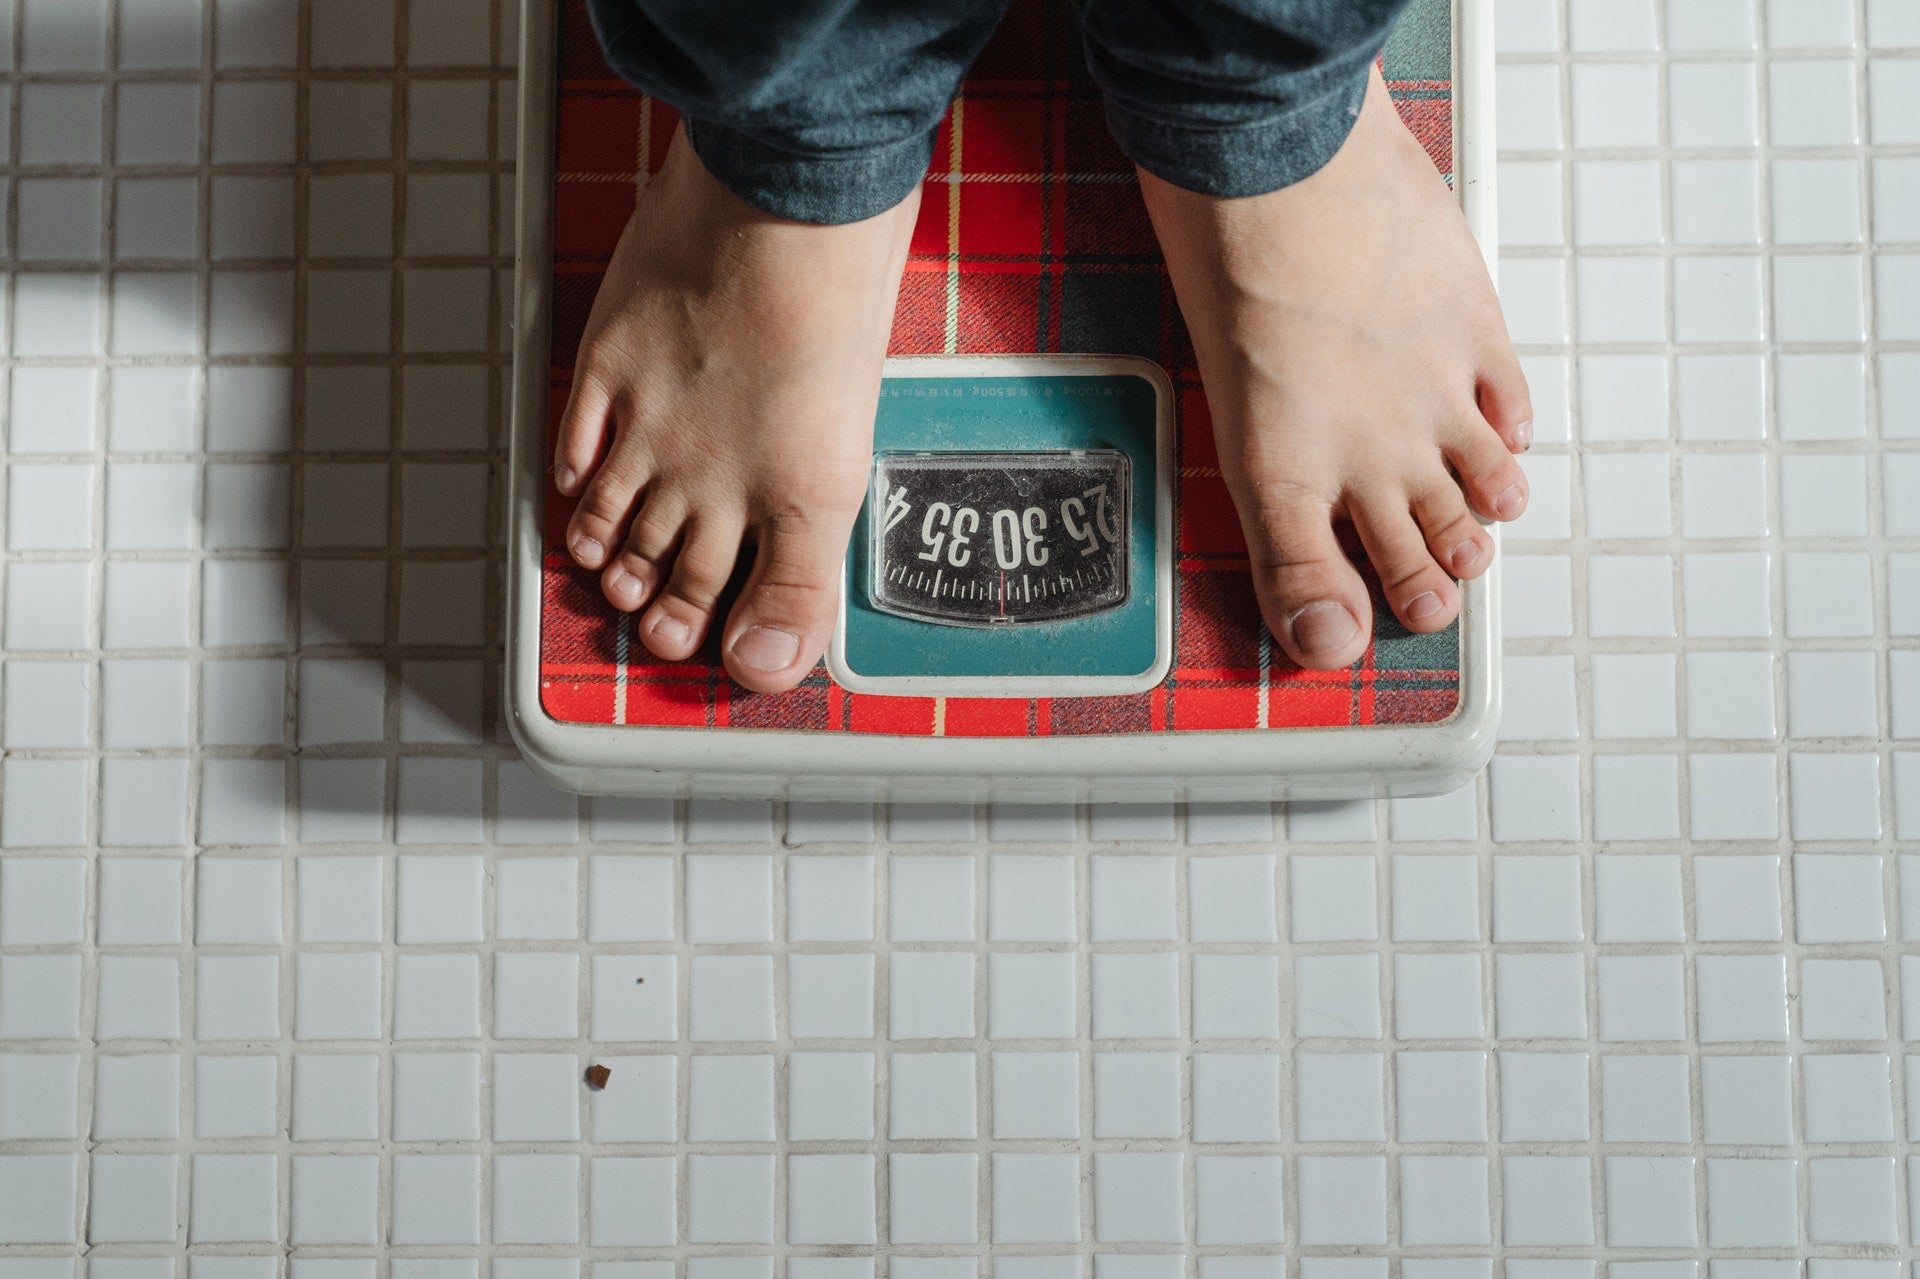 Image of a top view shot of a person's feet on a red weighing scale on a white tile flooring.